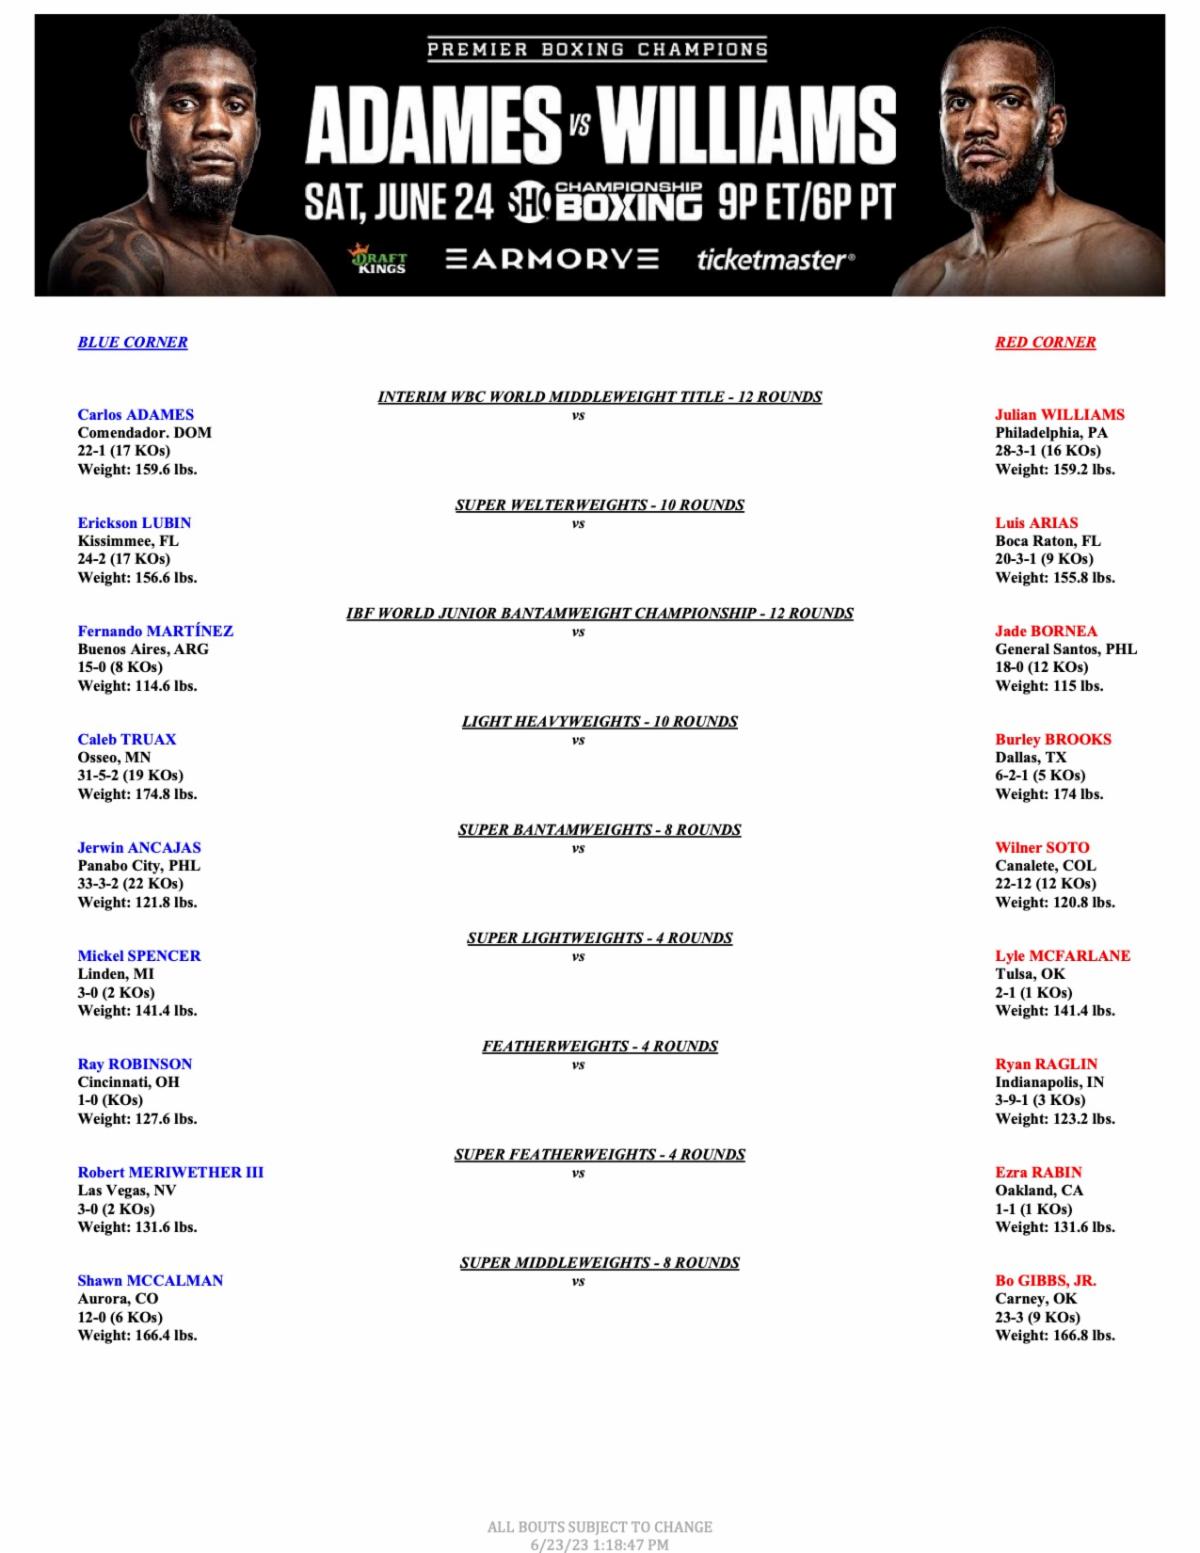 QUICK RESULTS FROM SHOWTIME BOXING AT THE MNPLS ARMORY